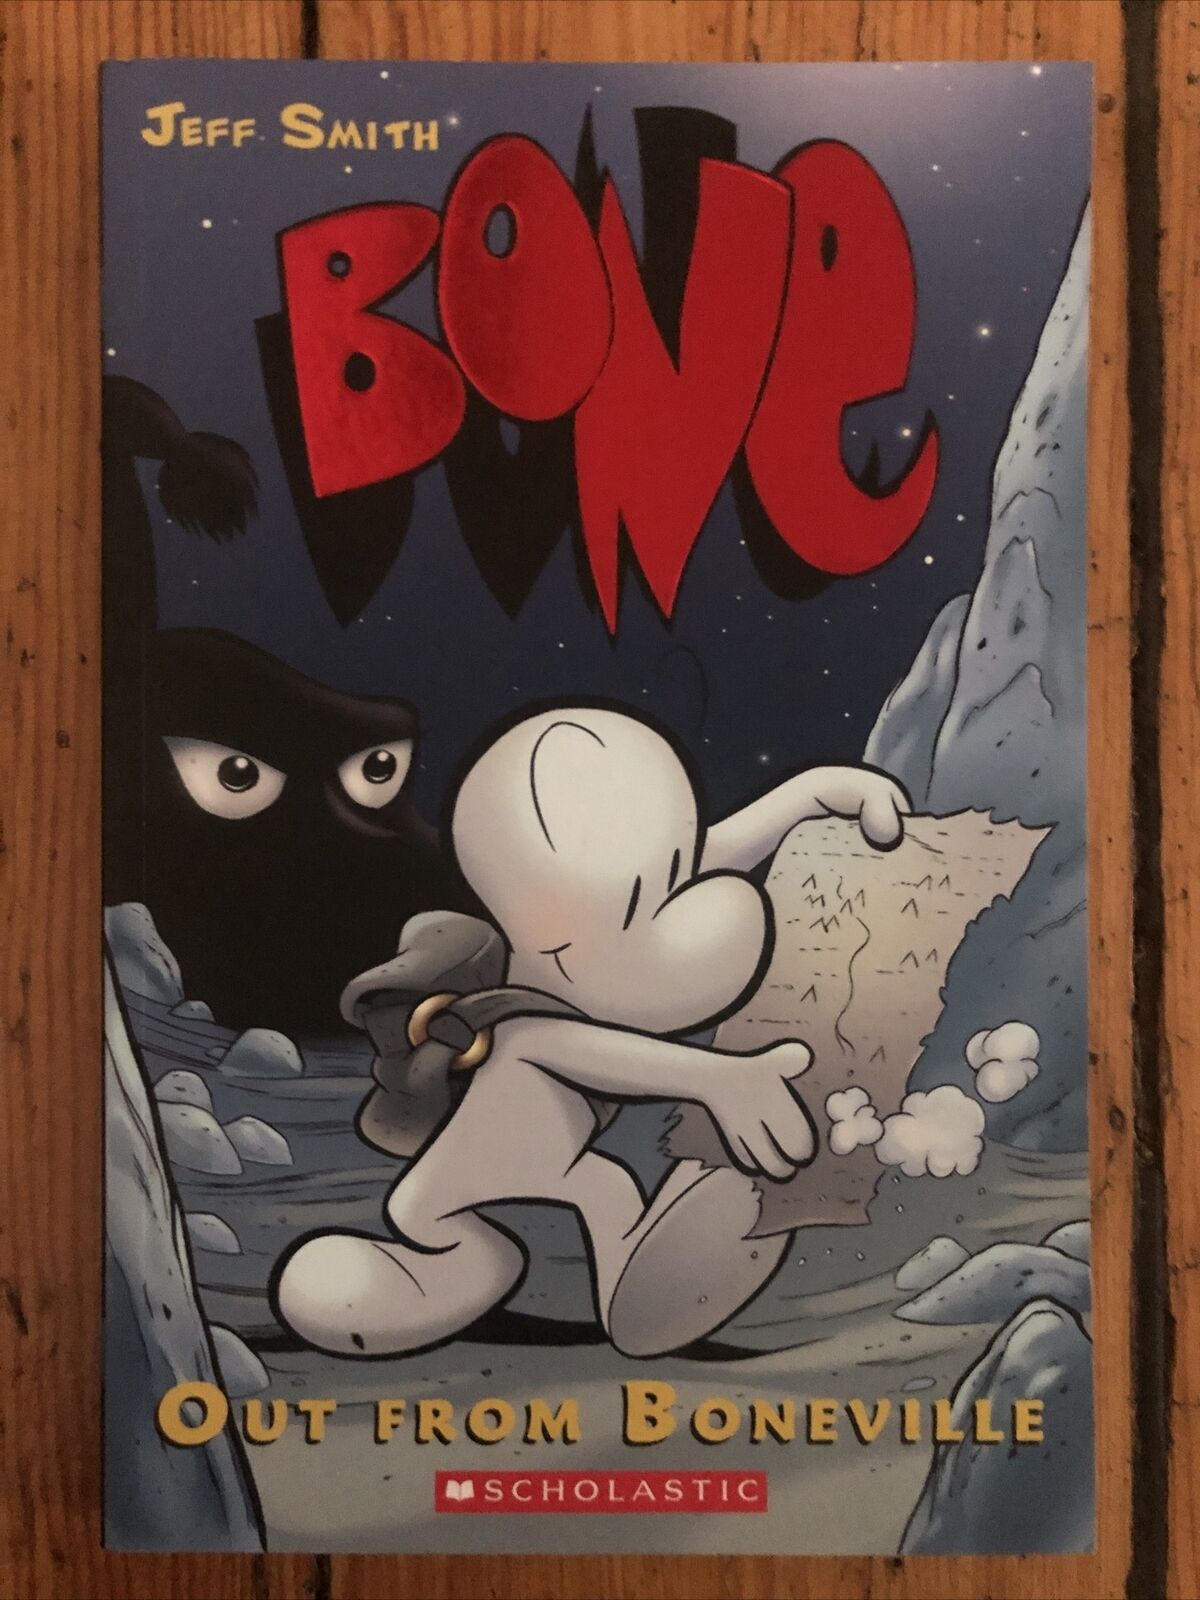 Bone - Book #1: “Out from Boneville” by Jeff Smith VF/NM